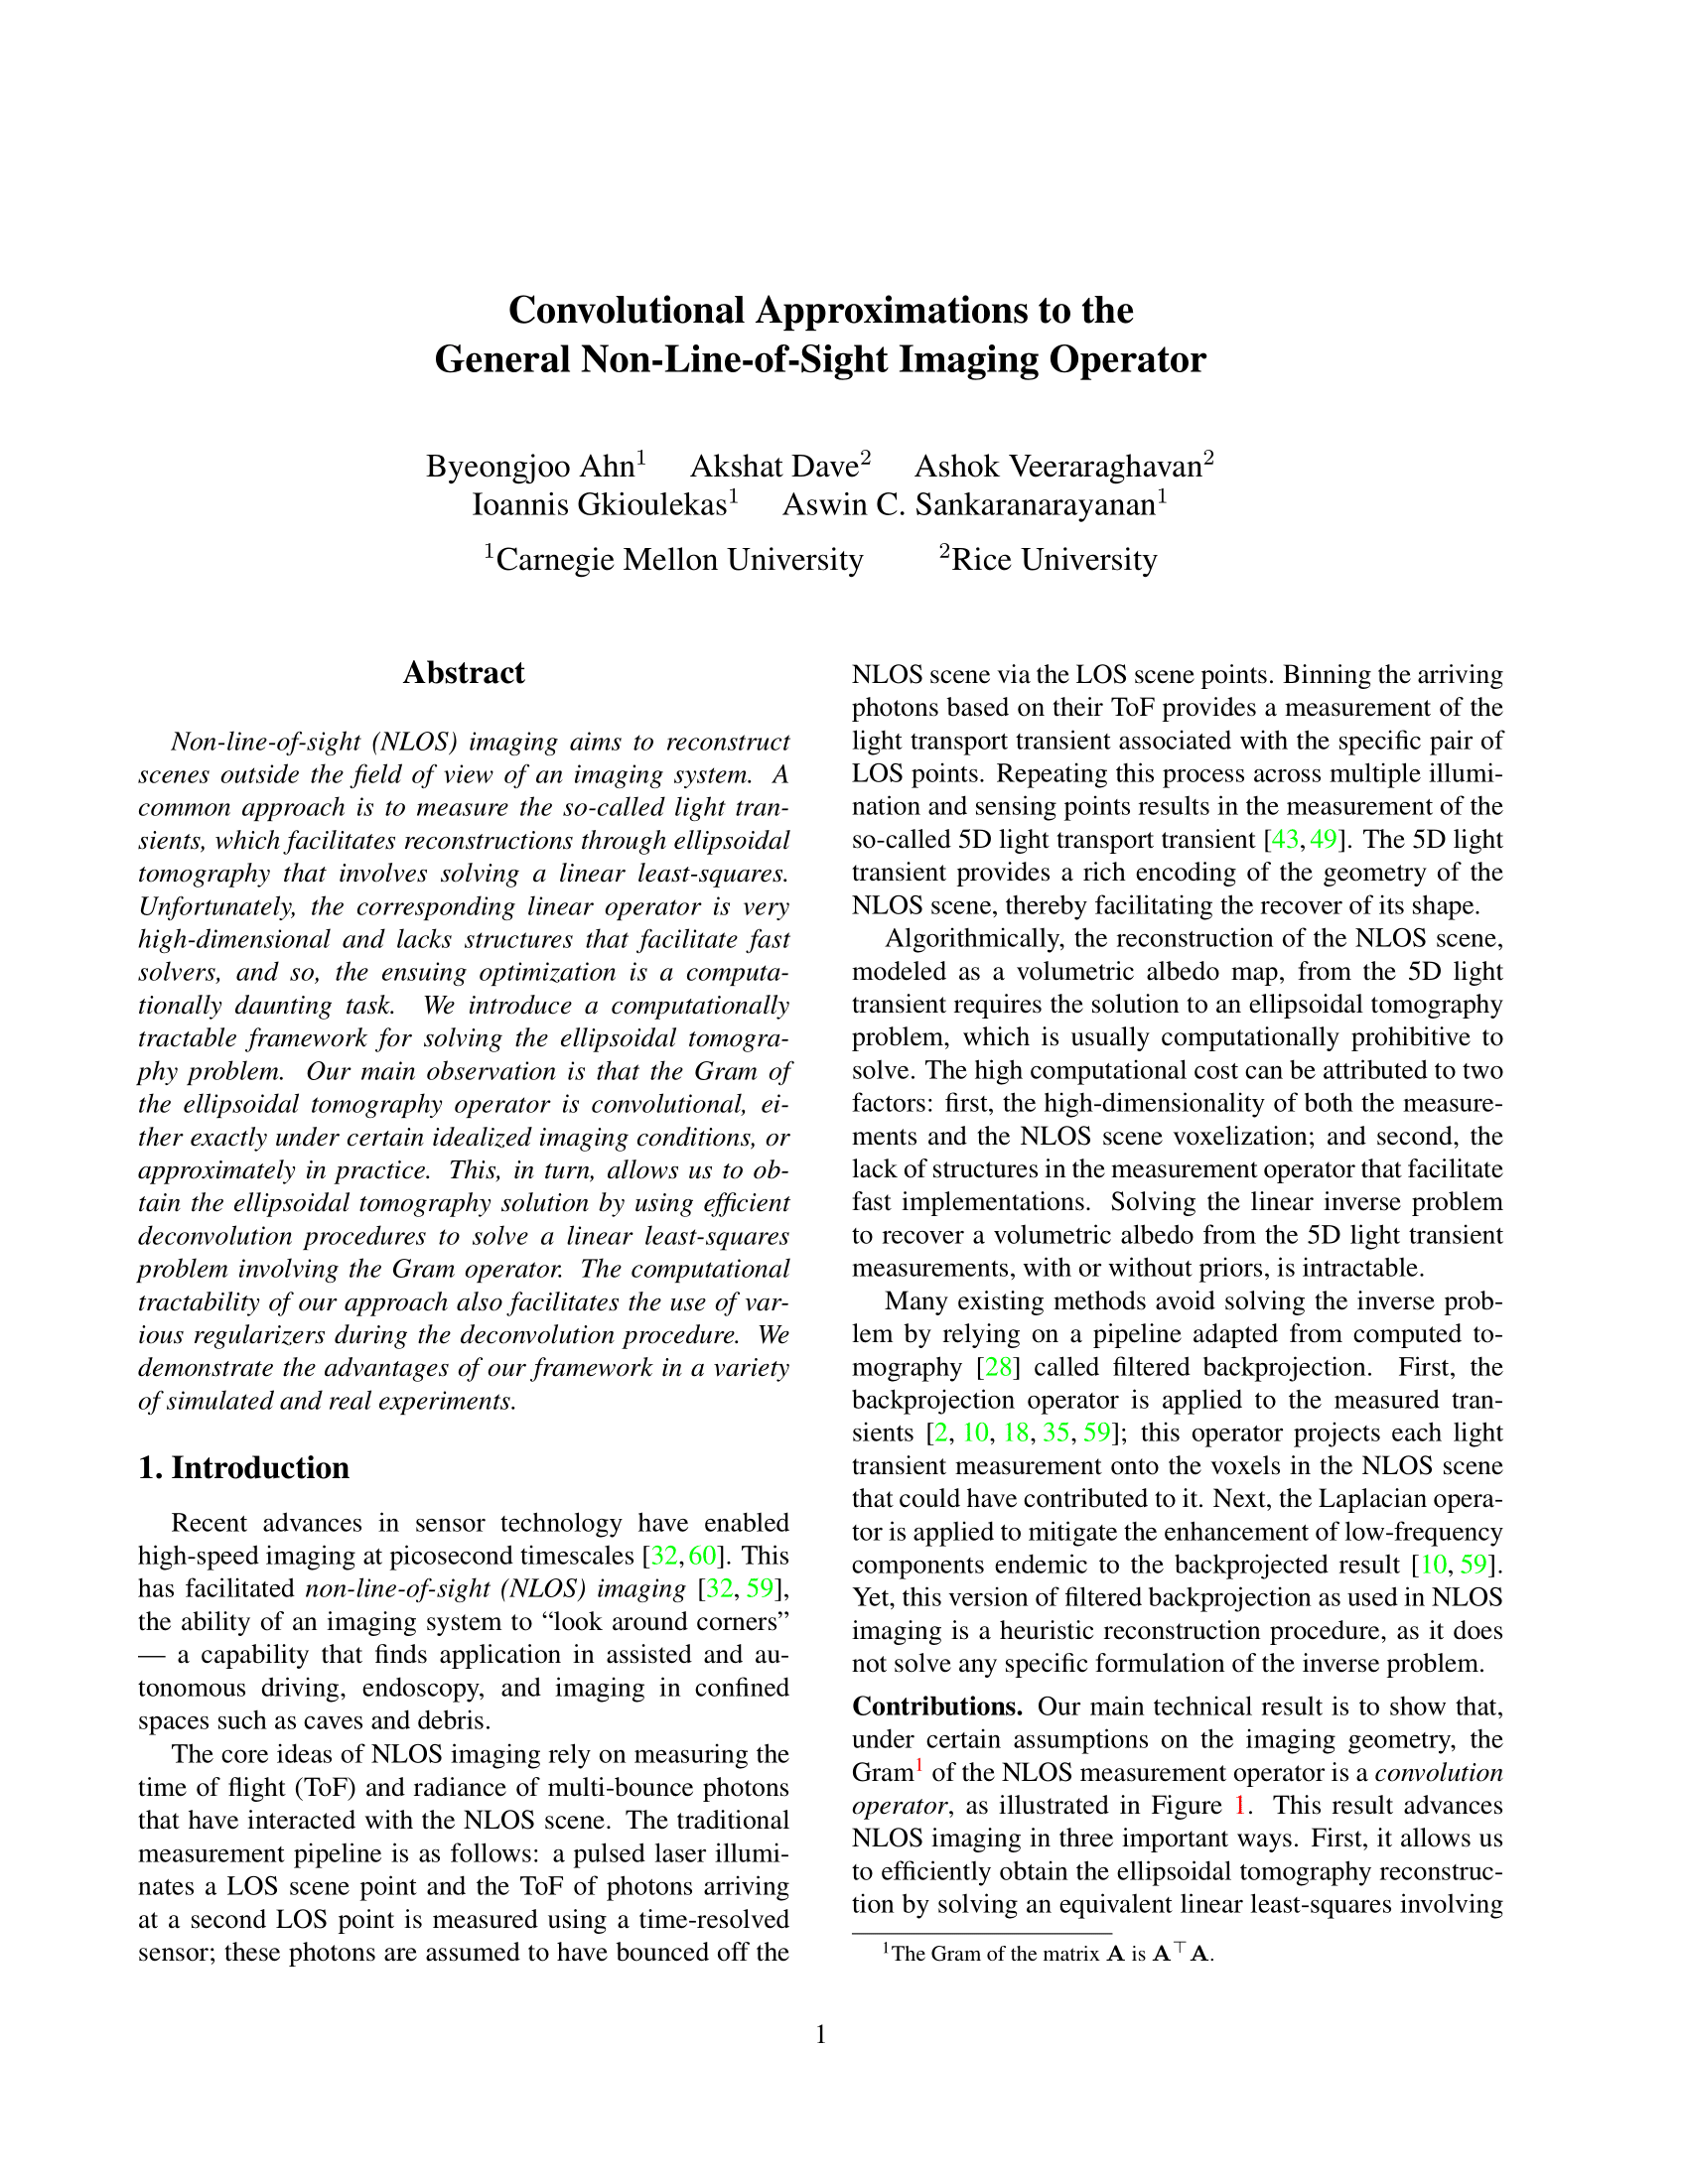 Link to paper